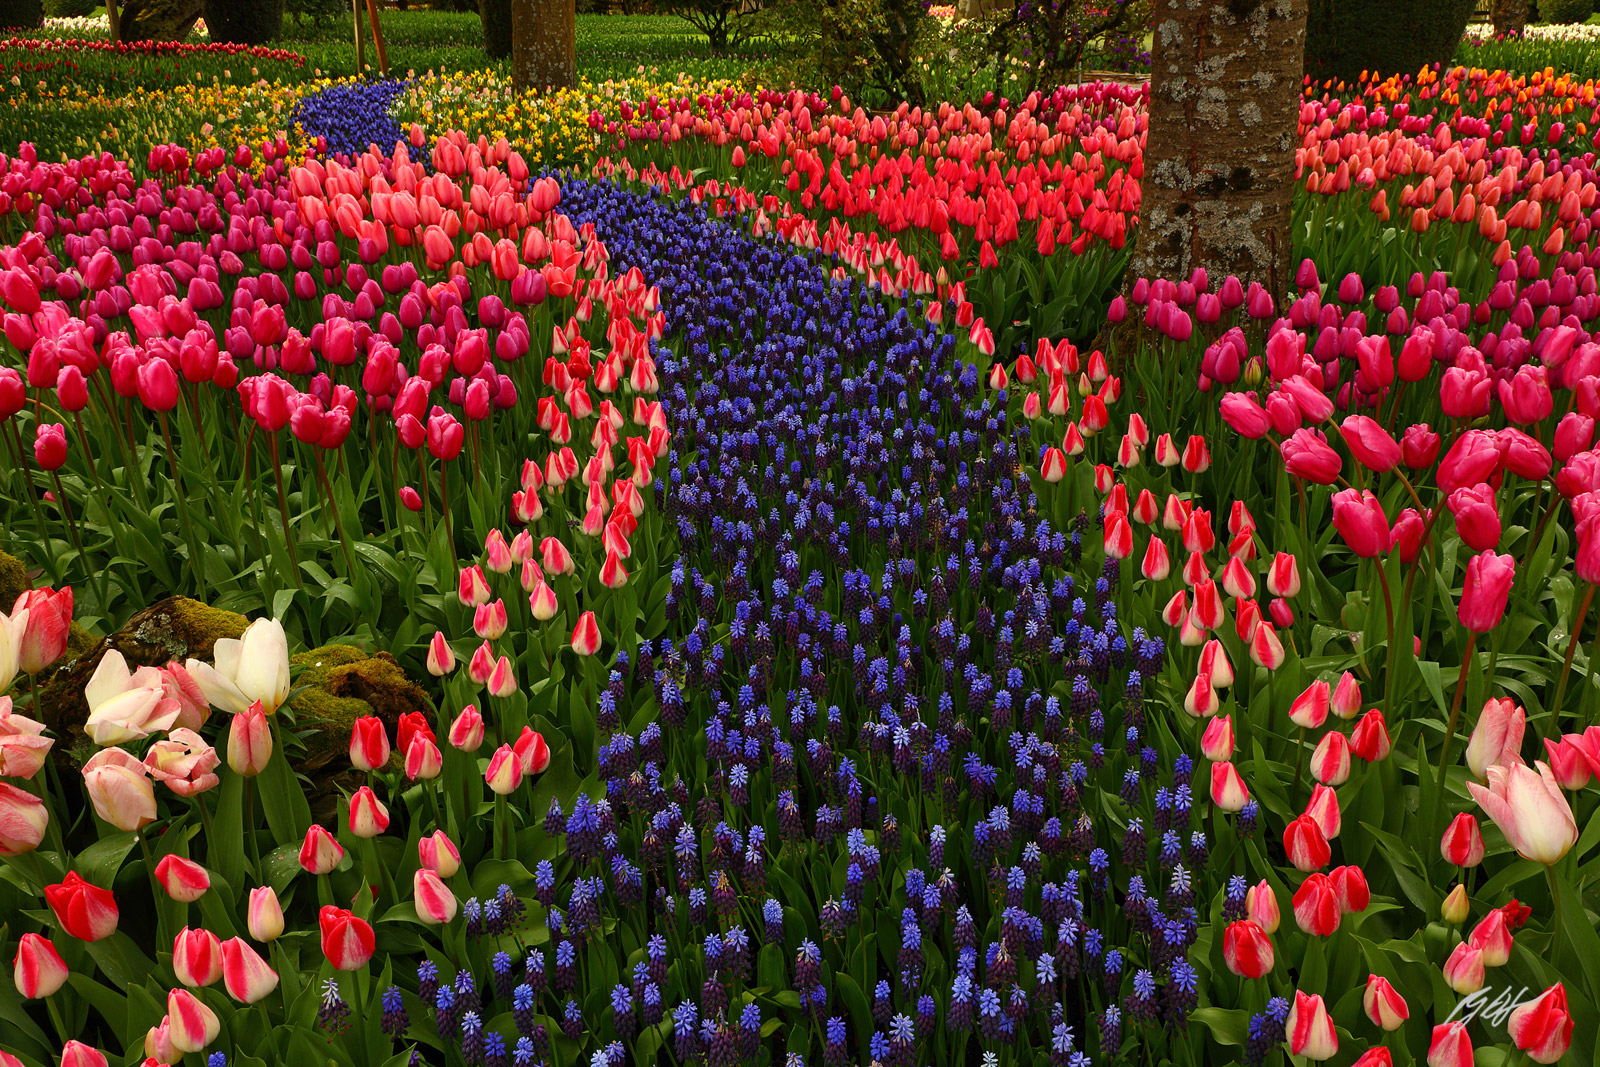 Hyacinth Path in the Tulips from Roozengaarde Garden in Skagit Valley in Washington